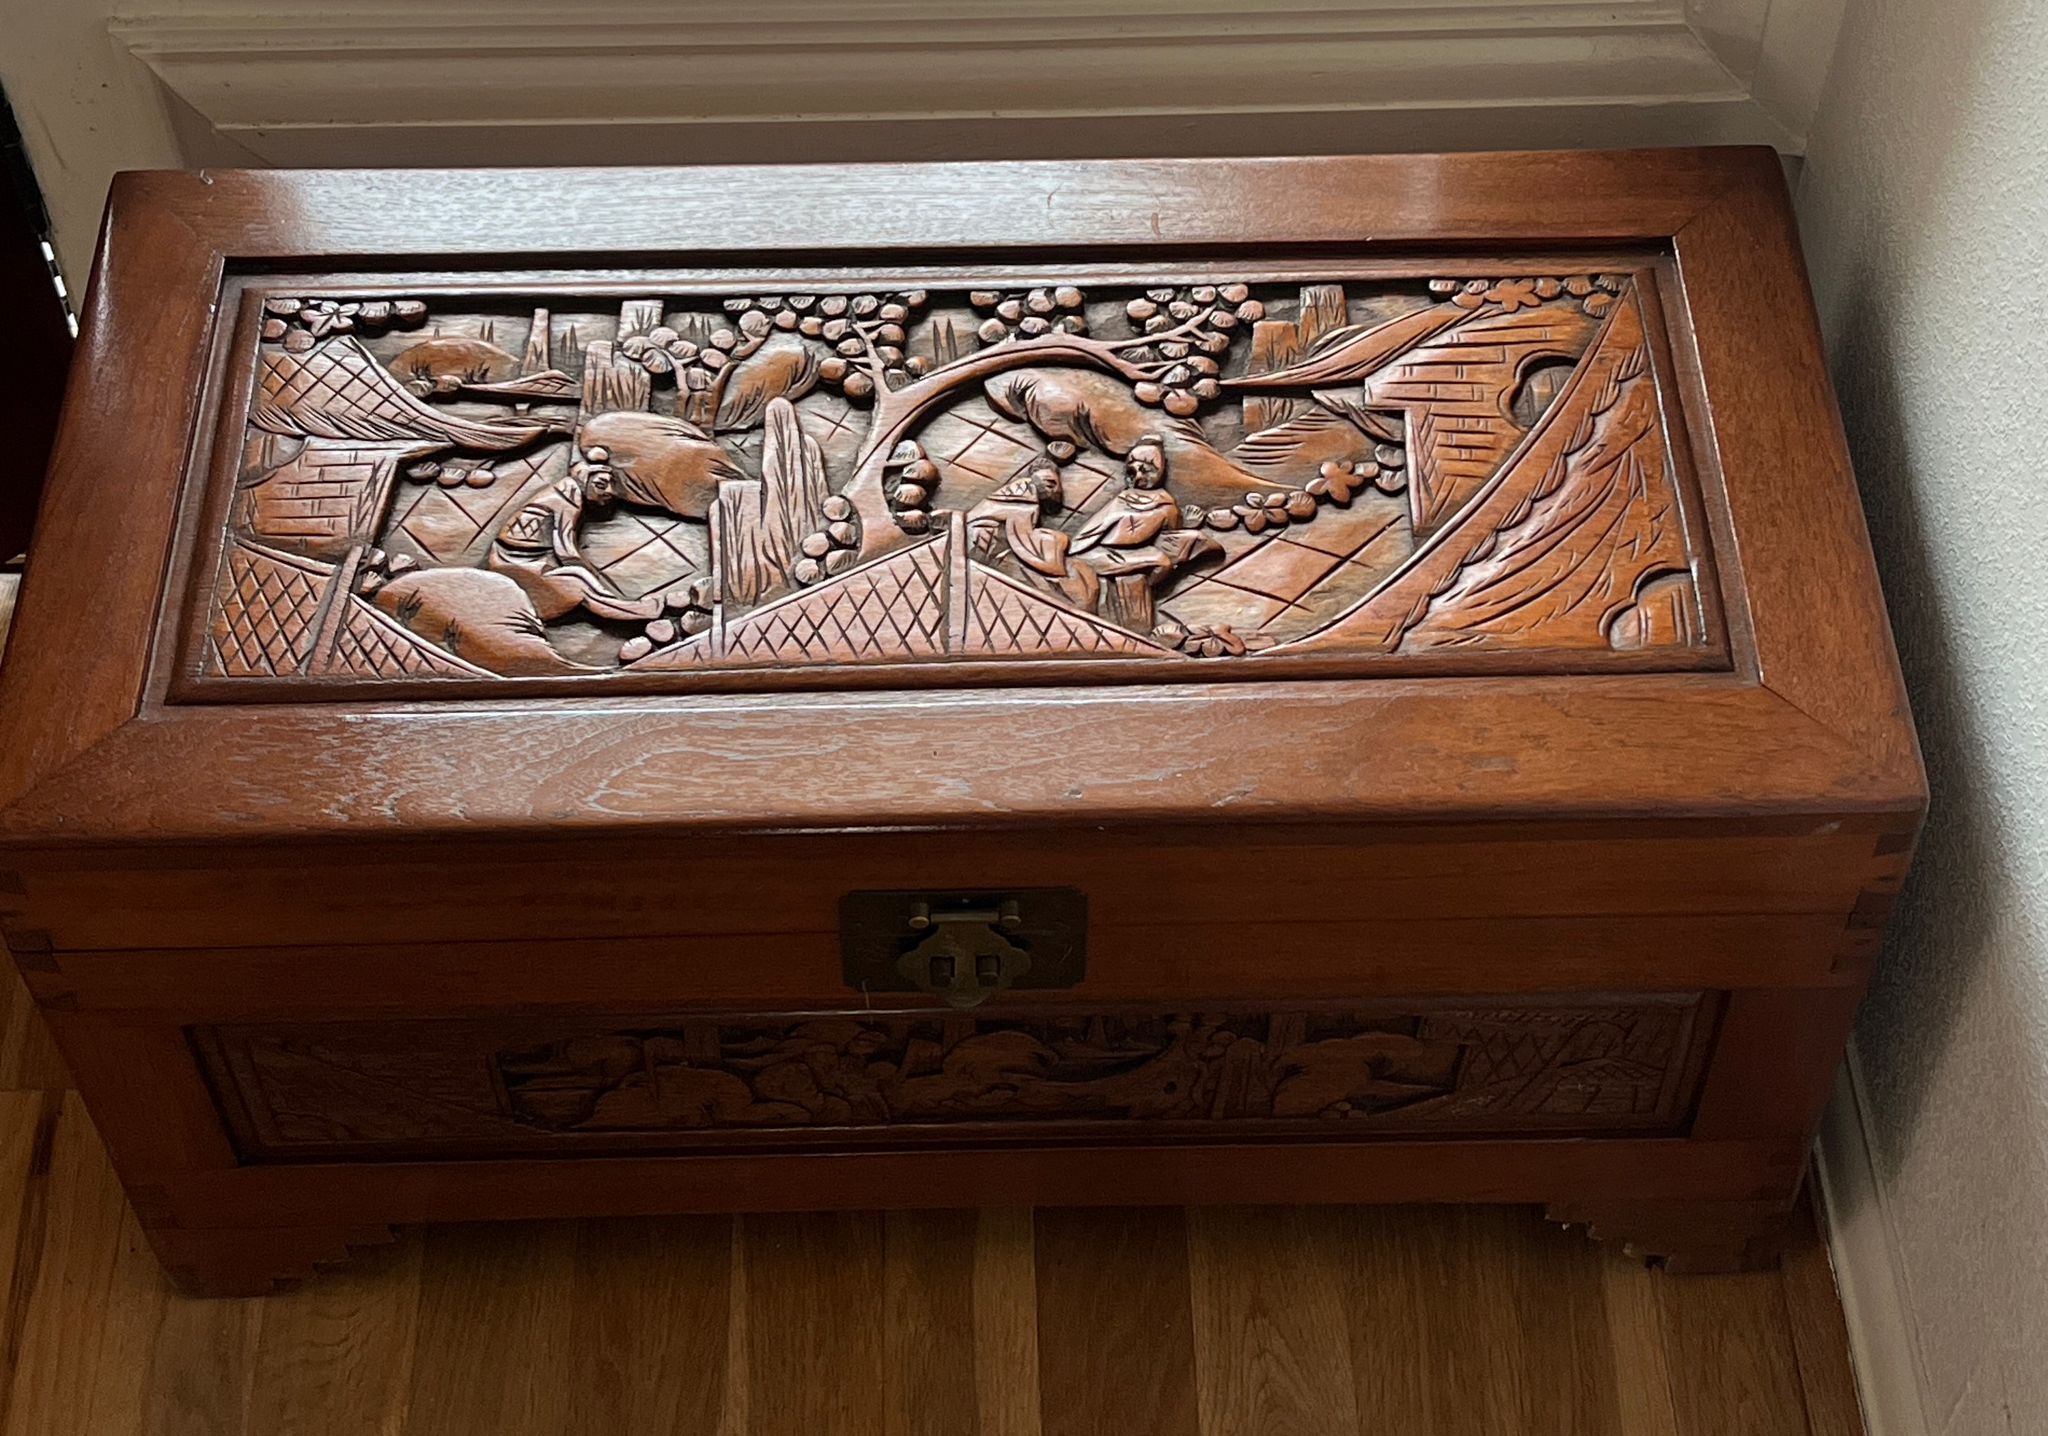 A camphor chest with brass fittings and carved pastural scene (74cm x 36cm x 40cm) - Image 6 of 7